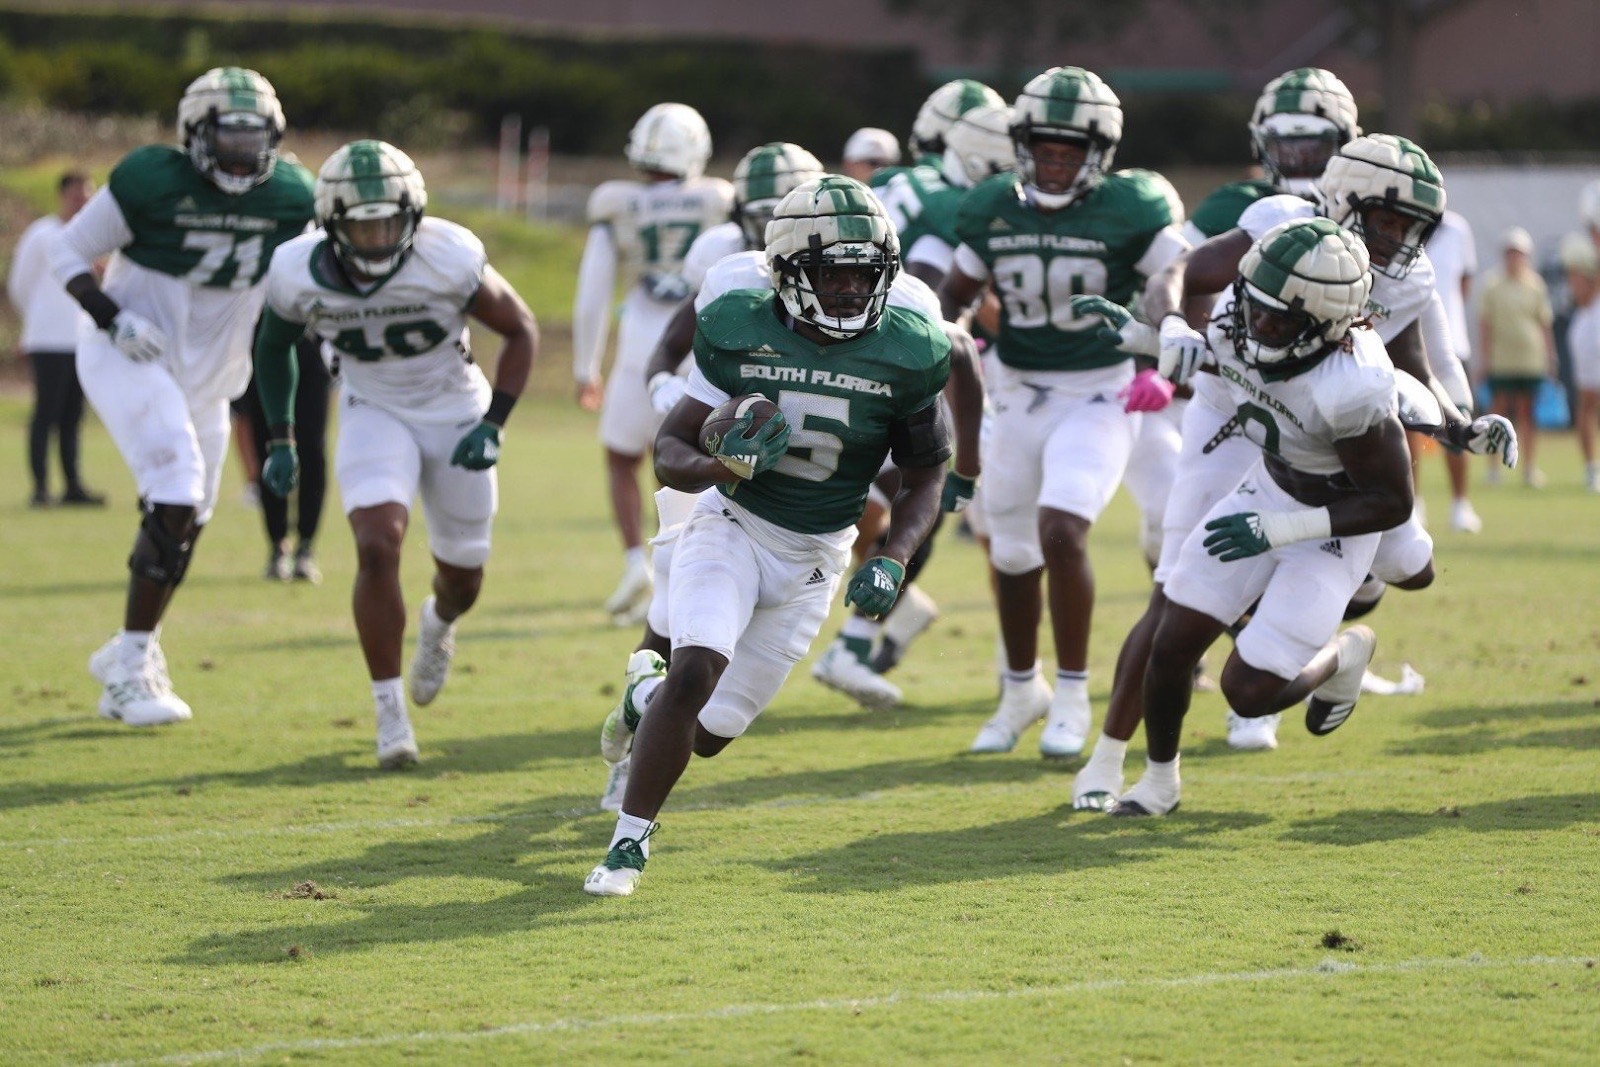 USF Football Preview: How Much Will Bulls Improve? - FanBuzz